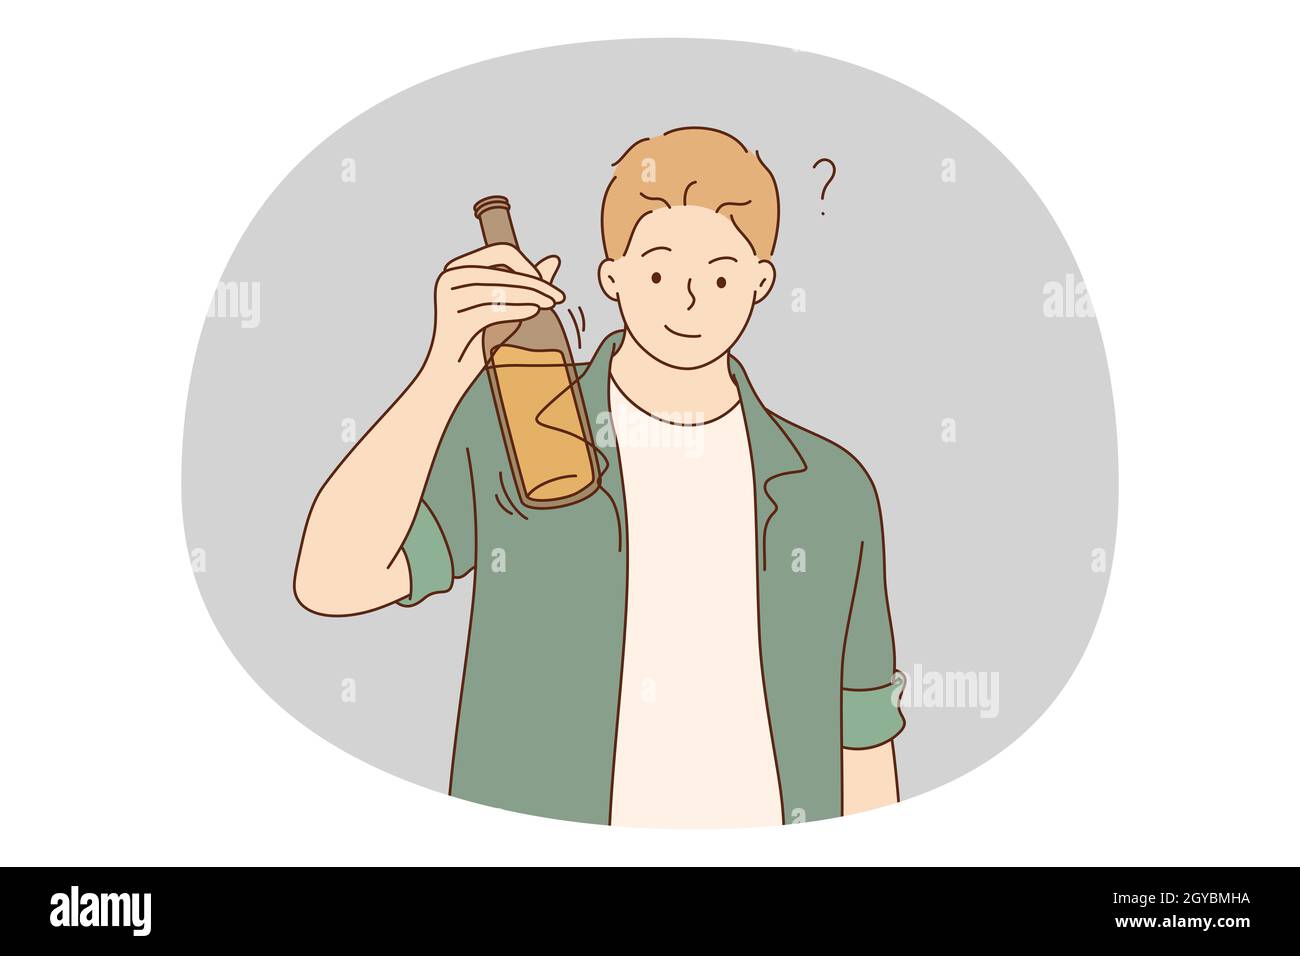 Alcohol addicted, spirit drinks, drinking lone concept. Young smiling man cartoon character standing holding bottle of wine, whiskey or other alcohol Stock Photo